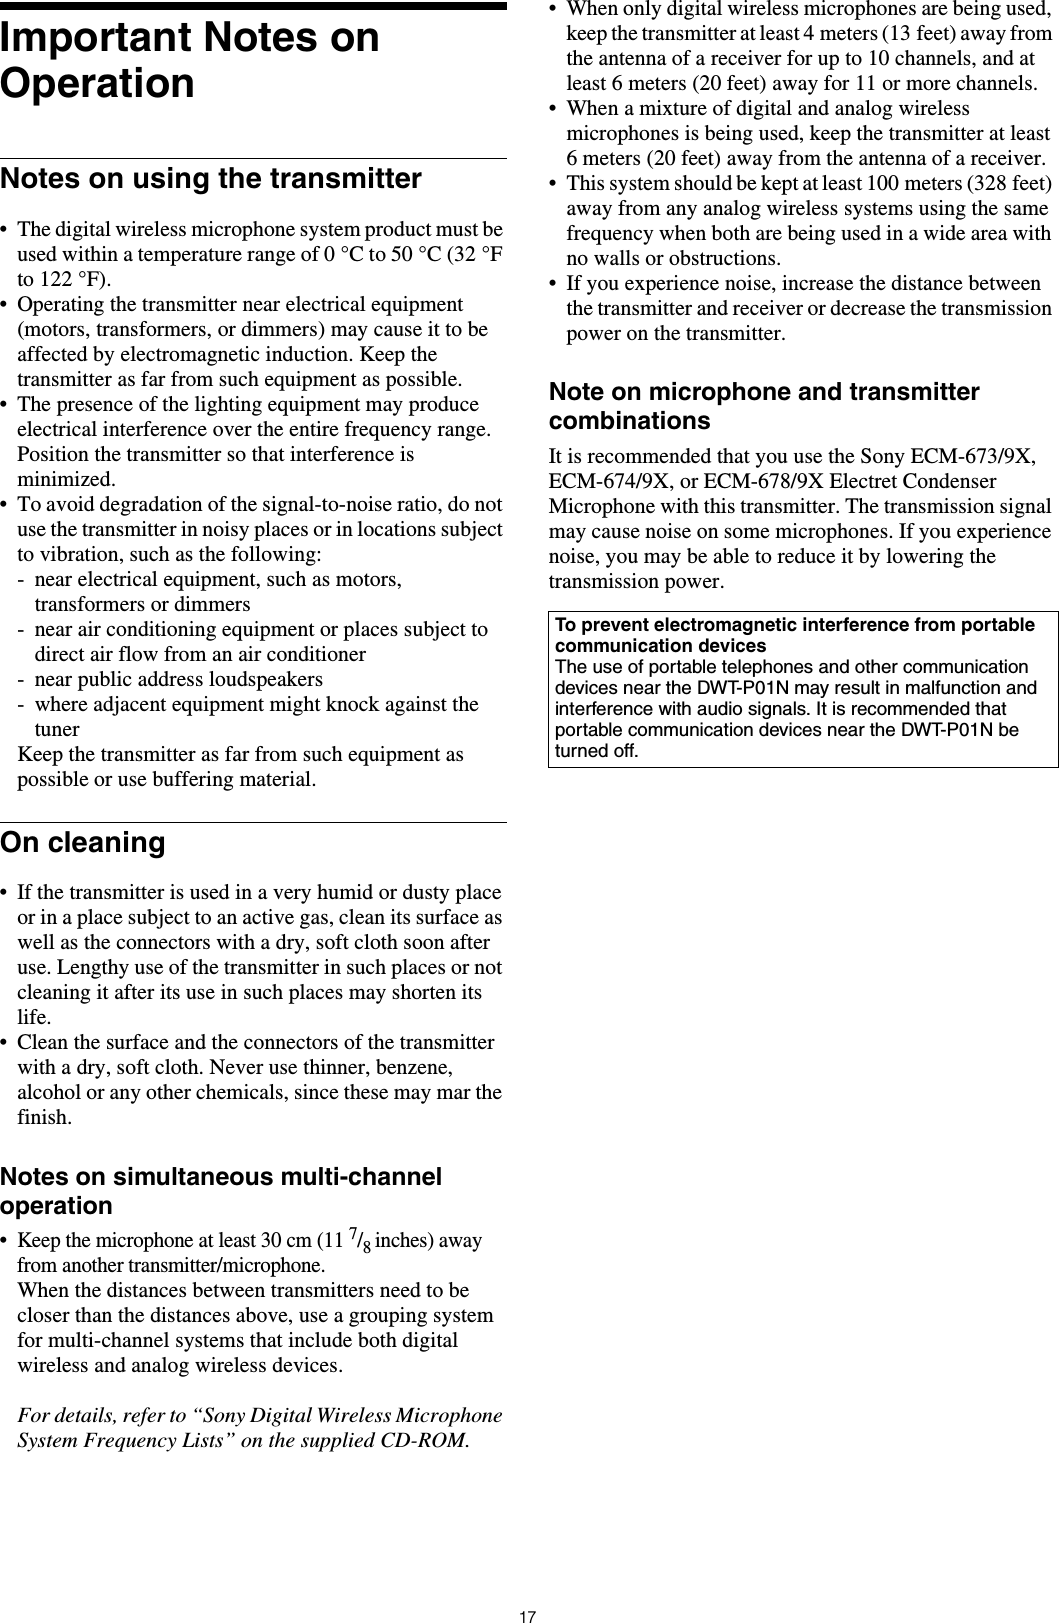 17Important Notes on OperationNotes on using the transmitter• The digital wireless microphone system product must be used within a temperature range of 0 °C to 50 °C (32 °F to 122 °F).• Operating the transmitter near electrical equipment (motors, transformers, or dimmers) may cause it to be affected by electromagnetic induction. Keep the transmitter as far from such equipment as possible.• The presence of the lighting equipment may produce electrical interference over the entire frequency range. Position the transmitter so that interference is minimized.• To avoid degradation of the signal-to-noise ratio, do not use the transmitter in noisy places or in locations subject to vibration, such as the following:- near electrical equipment, such as motors, transformers or dimmers- near air conditioning equipment or places subject to direct air flow from an air conditioner- near public address loudspeakers- where adjacent equipment might knock against the tunerKeep the transmitter as far from such equipment as possible or use buffering material.On cleaning• If the transmitter is used in a very humid or dusty place or in a place subject to an active gas, clean its surface as well as the connectors with a dry, soft cloth soon after use. Lengthy use of the transmitter in such places or not cleaning it after its use in such places may shorten its life.• Clean the surface and the connectors of the transmitter with a dry, soft cloth. Never use thinner, benzene, alcohol or any other chemicals, since these may mar the finish.Notes on simultaneous multi-channel operation•Keep the microphone at least 30 cm (11 7/8 inches) away from another transmitter/microphone.When the distances between transmitters need to be closer than the distances above, use a grouping system for multi-channel systems that include both digital wireless and analog wireless devices.For details, refer to “Sony Digital Wireless Microphone System Frequency Lists” on the supplied CD-ROM.• When only digital wireless microphones are being used, keep the transmitter at least 4 meters (13 feet) away from the antenna of a receiver for up to 10 channels, and at least 6 meters (20 feet) away for 11 or more channels.• When a mixture of digital and analog wireless microphones is being used, keep the transmitter at least 6 meters (20 feet) away from the antenna of a receiver.• This system should be kept at least 100 meters (328 feet) away from any analog wireless systems using the same frequency when both are being used in a wide area with no walls or obstructions.• If you experience noise, increase the distance between the transmitter and receiver or decrease the transmission power on the transmitter.Note on microphone and transmitter combinationsIt is recommended that you use the Sony ECM-673/9X, ECM-674/9X, or ECM-678/9X Electret Condenser Microphone with this transmitter. The transmission signal may cause noise on some microphones. If you experience noise, you may be able to reduce it by lowering the transmission power.To prevent electromagnetic interference from portable communication devicesThe use of portable telephones and other communication devices near the DWT-P01N may result in malfunction and interference with audio signals. It is recommended that portable communication devices near the DWT-P01N be turned off.